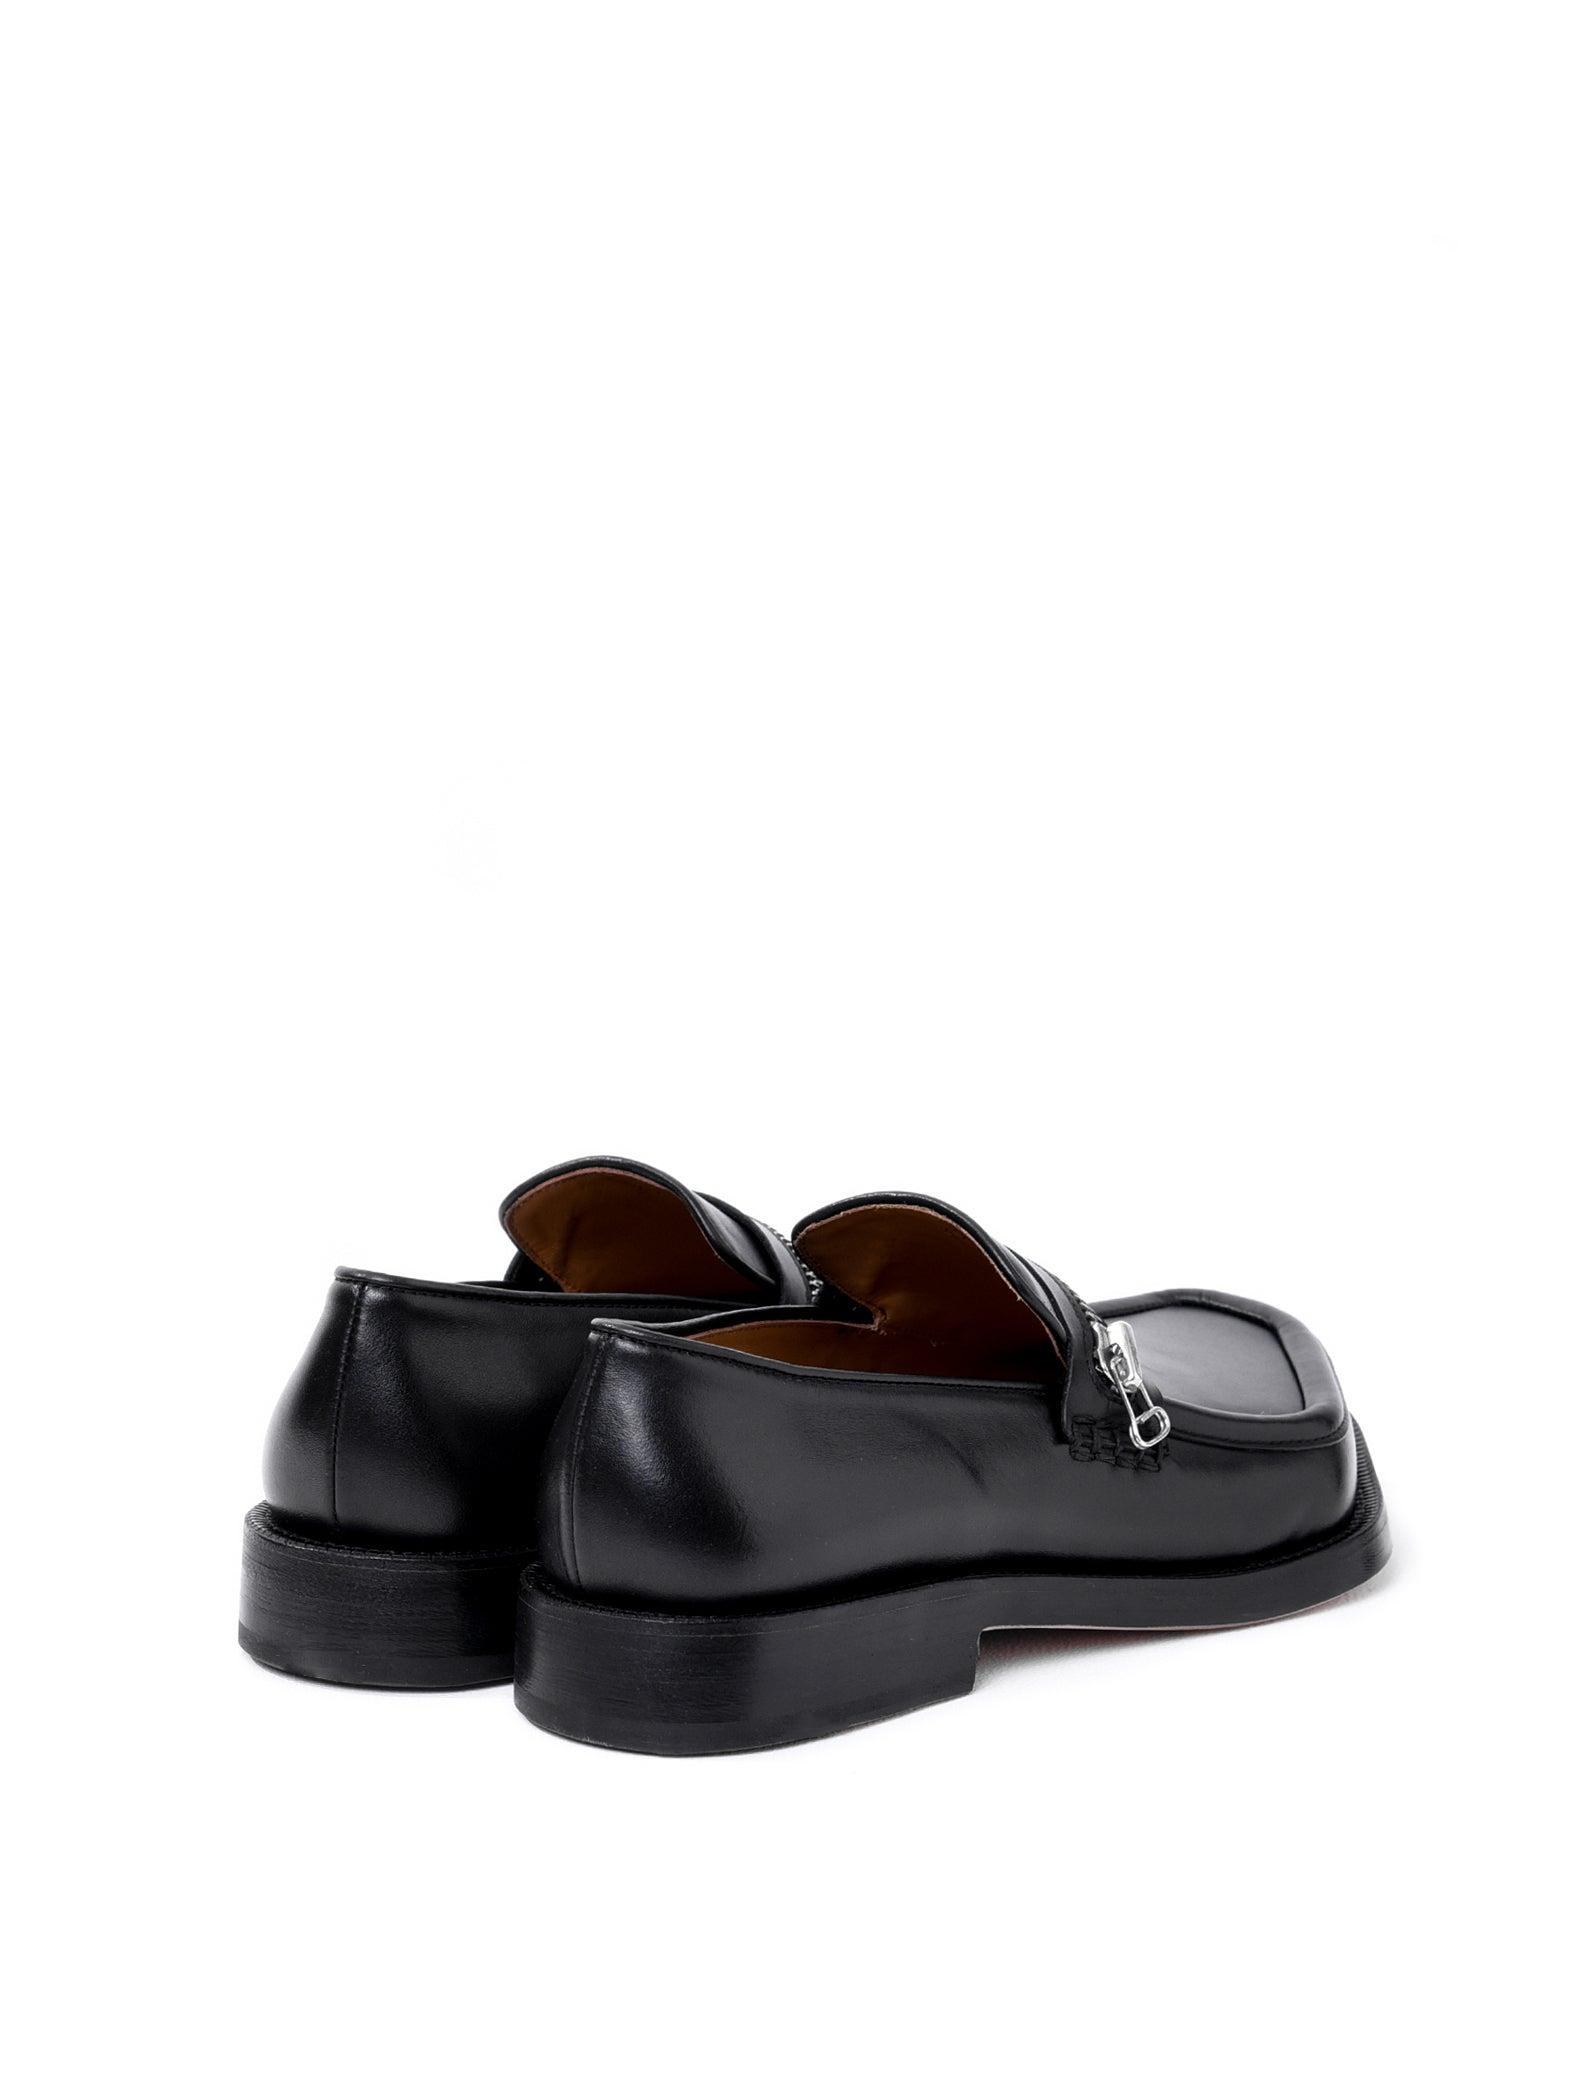 Magliano Black Classic Monster Loafer | Lyst